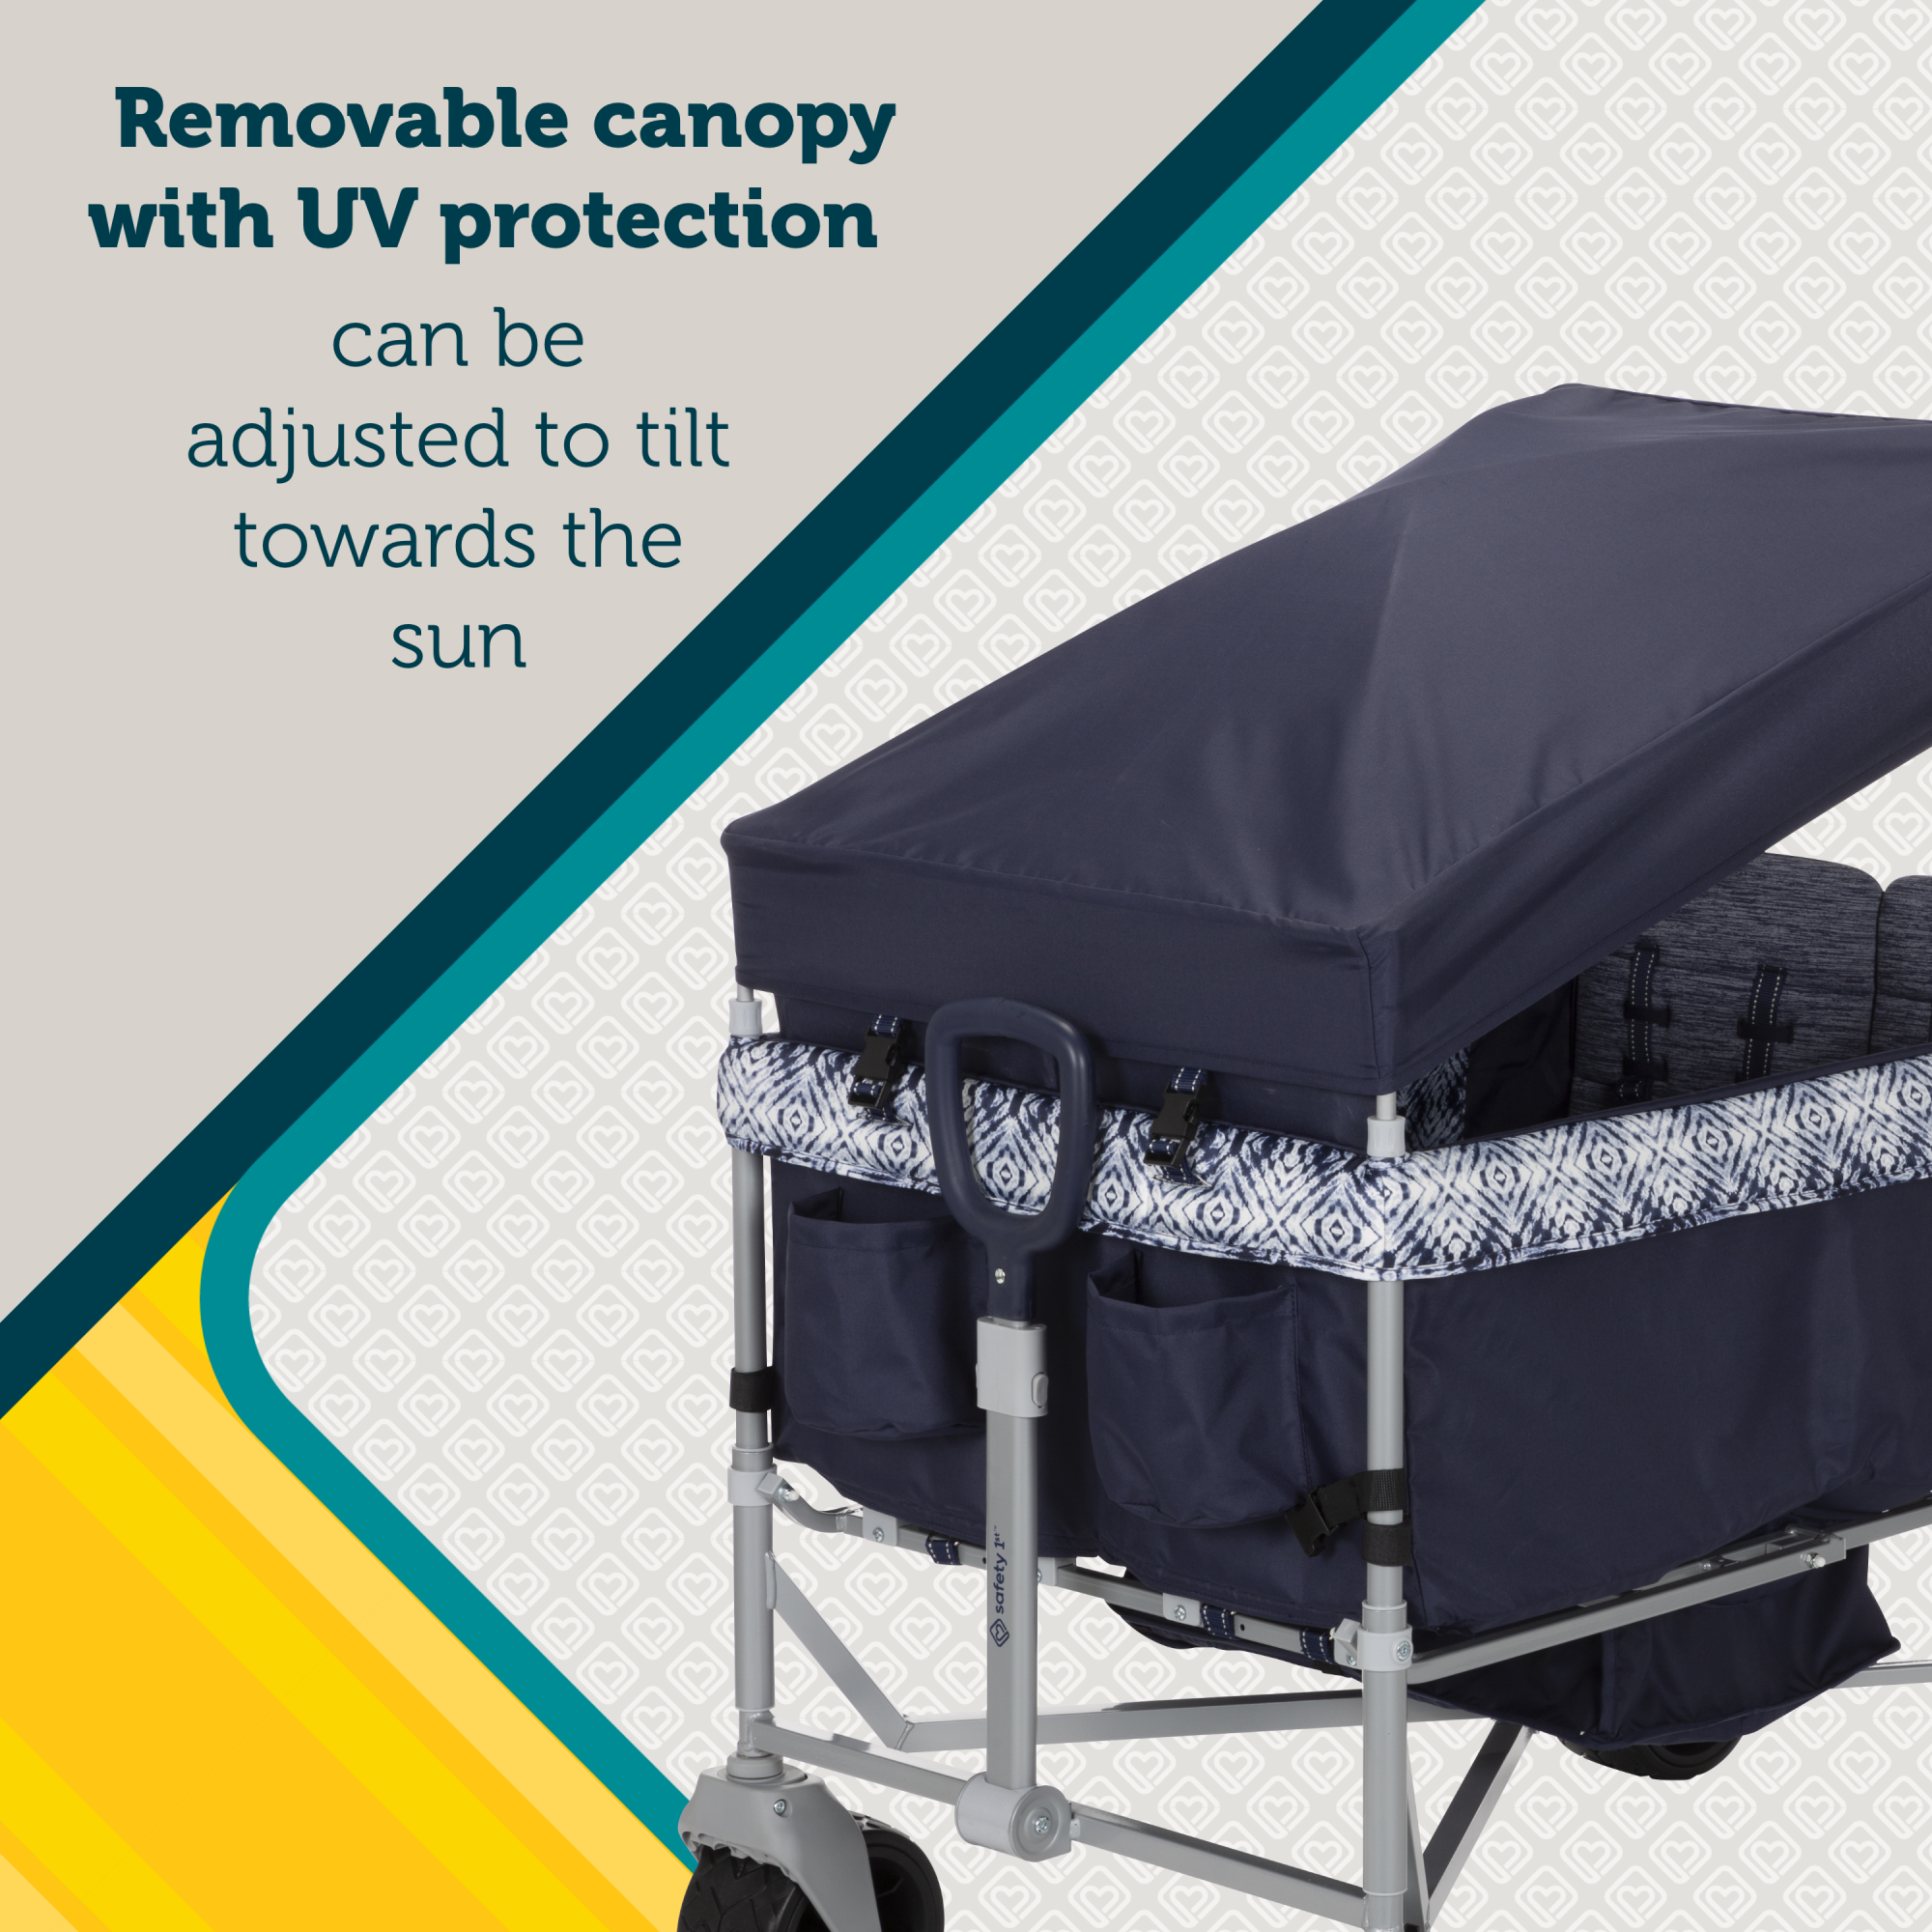 Summit Quad Wagon Stroller - removable canopy with UV protection can be adjusted to tilt towards the sun